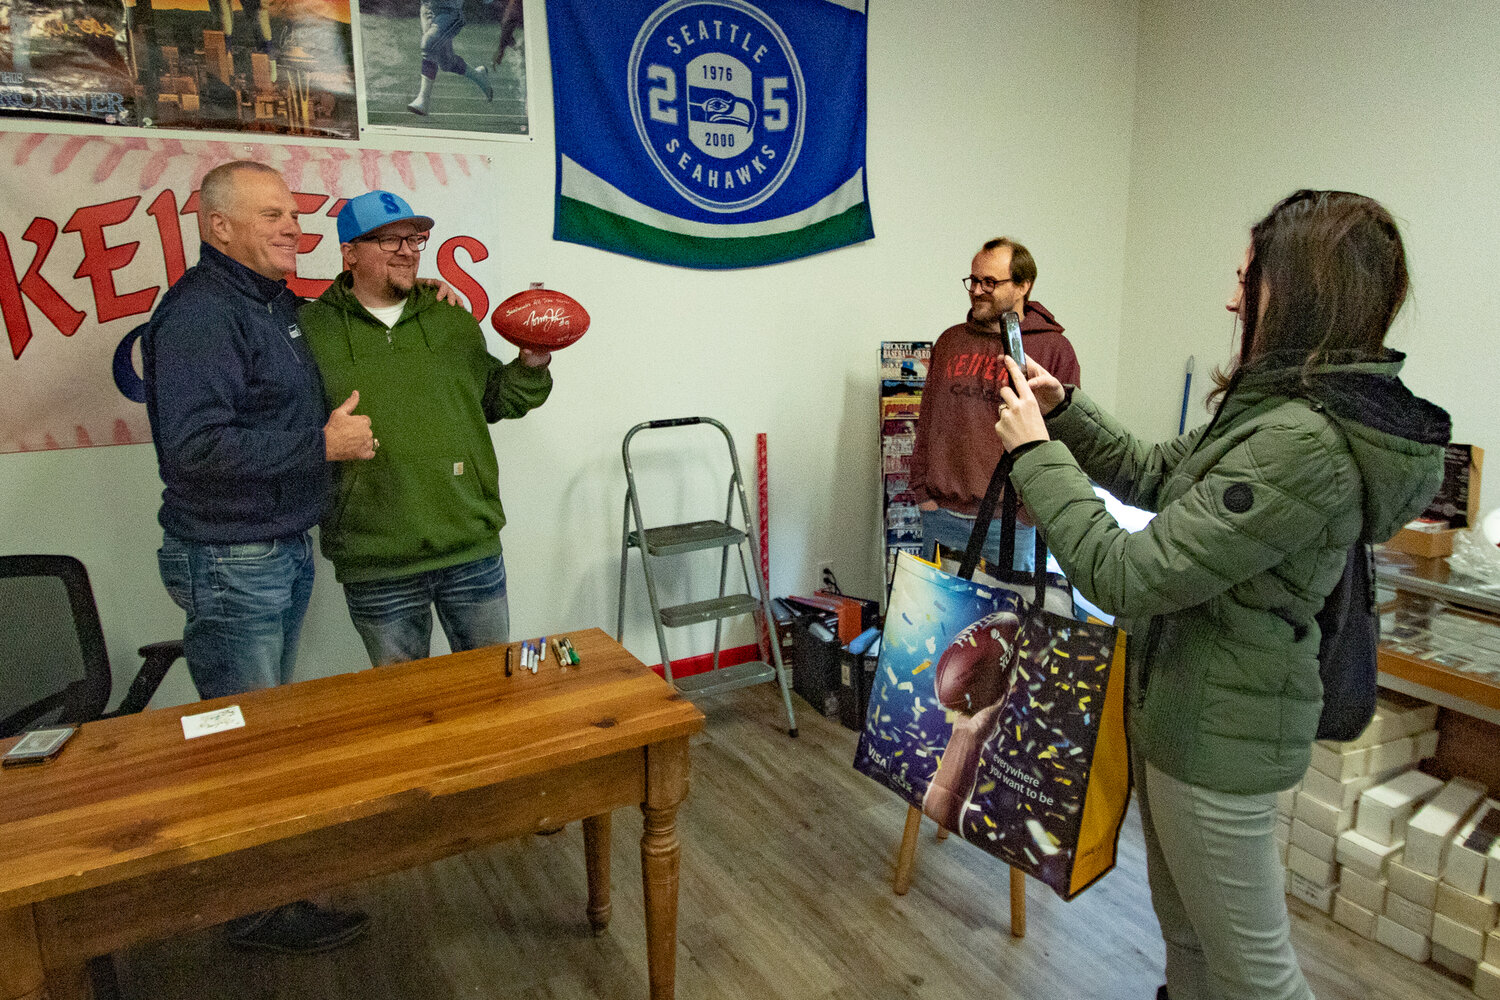 Former Seattle Seahawks kicker Norm Johnson, also known as "Mr. Automatic," poses with Brandon Maggs while Heidi Costello takes a picture after signing a football for Maggs at Keiper's Cards on Saturday, Dec. 2. during a card and memorabilia show in downtown Centralia.